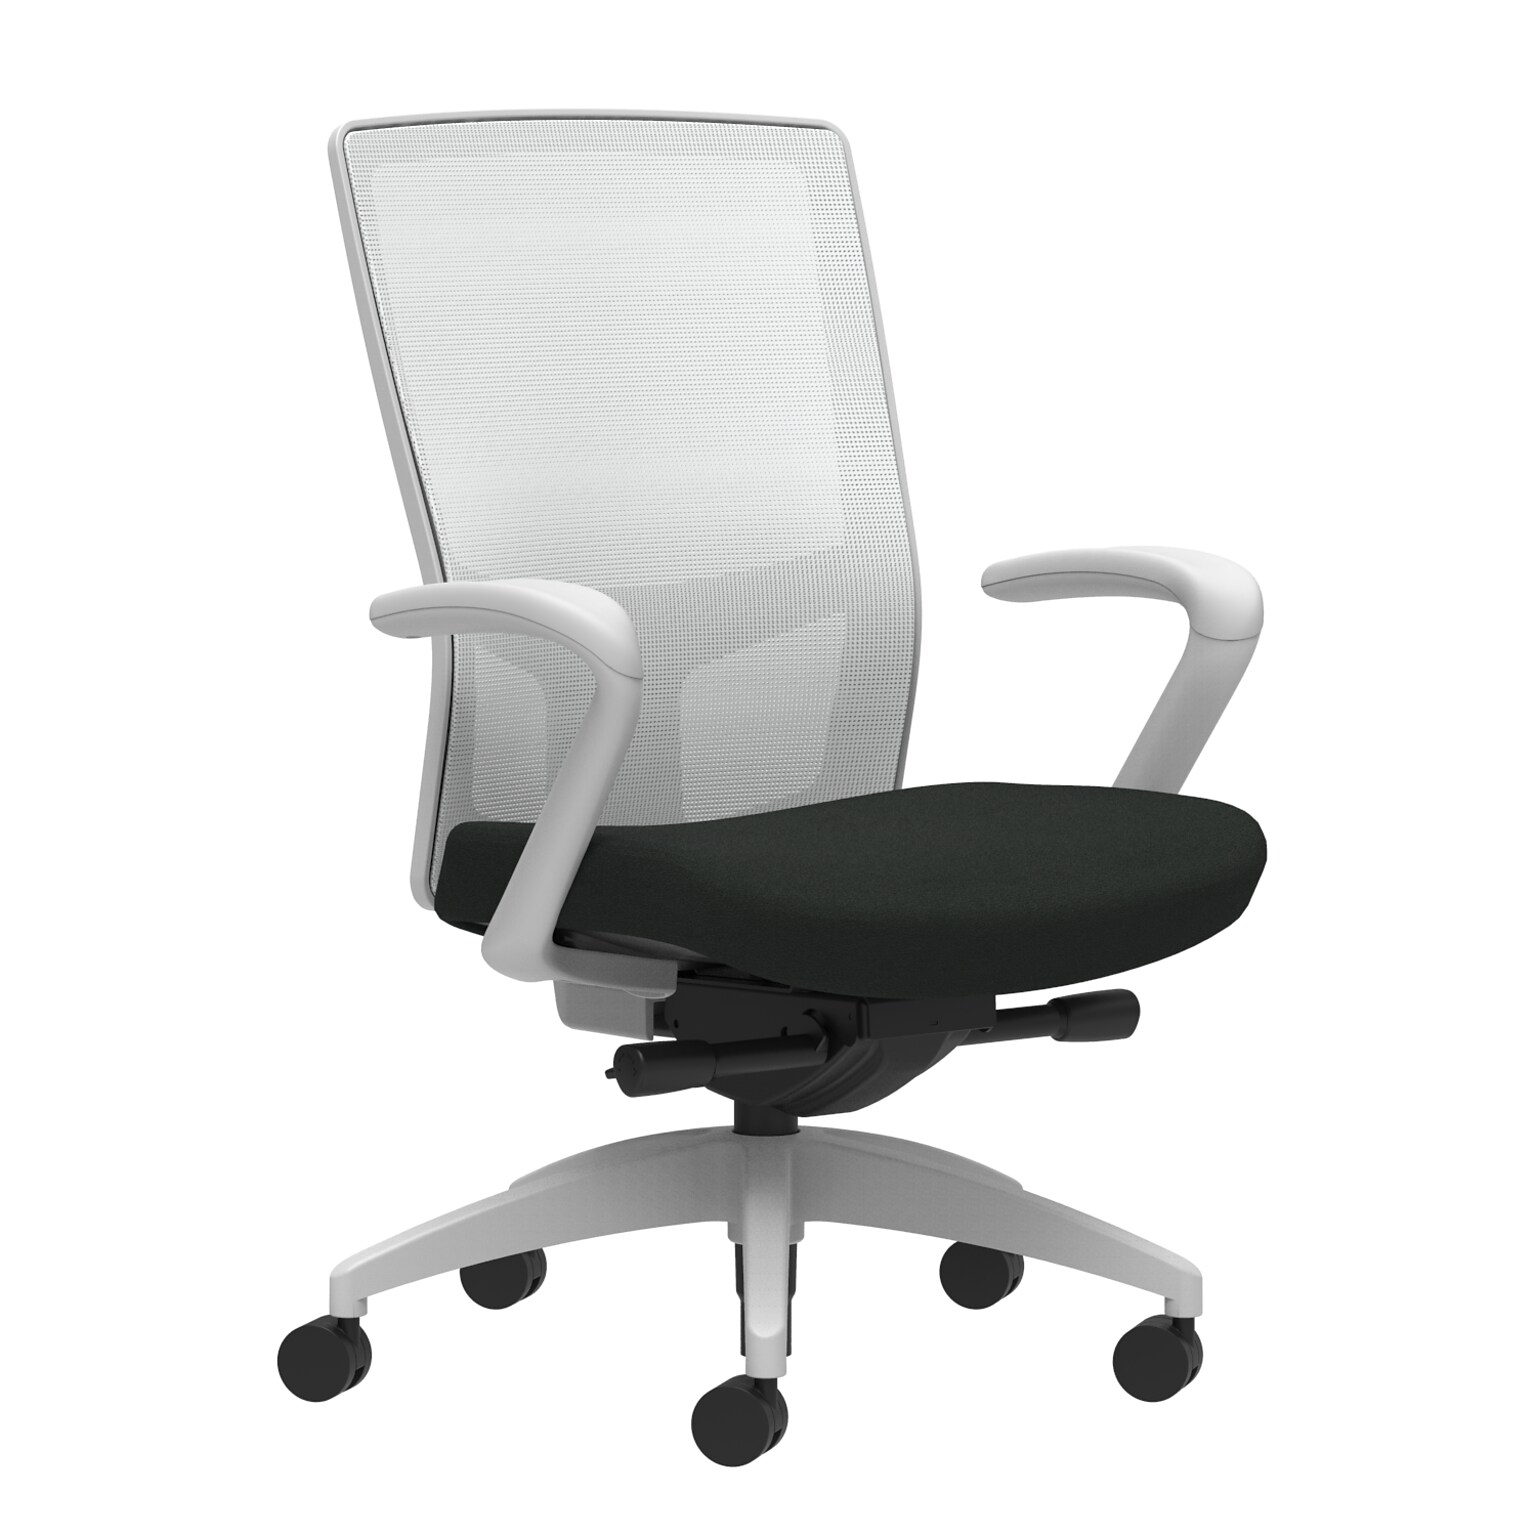 Union & Scale Workplace2.0™ Task Chair, Black Vinyl, Integrated Lumbar, Fixed Arms, Advanced Synchro-Tilt Seat Control (53594)